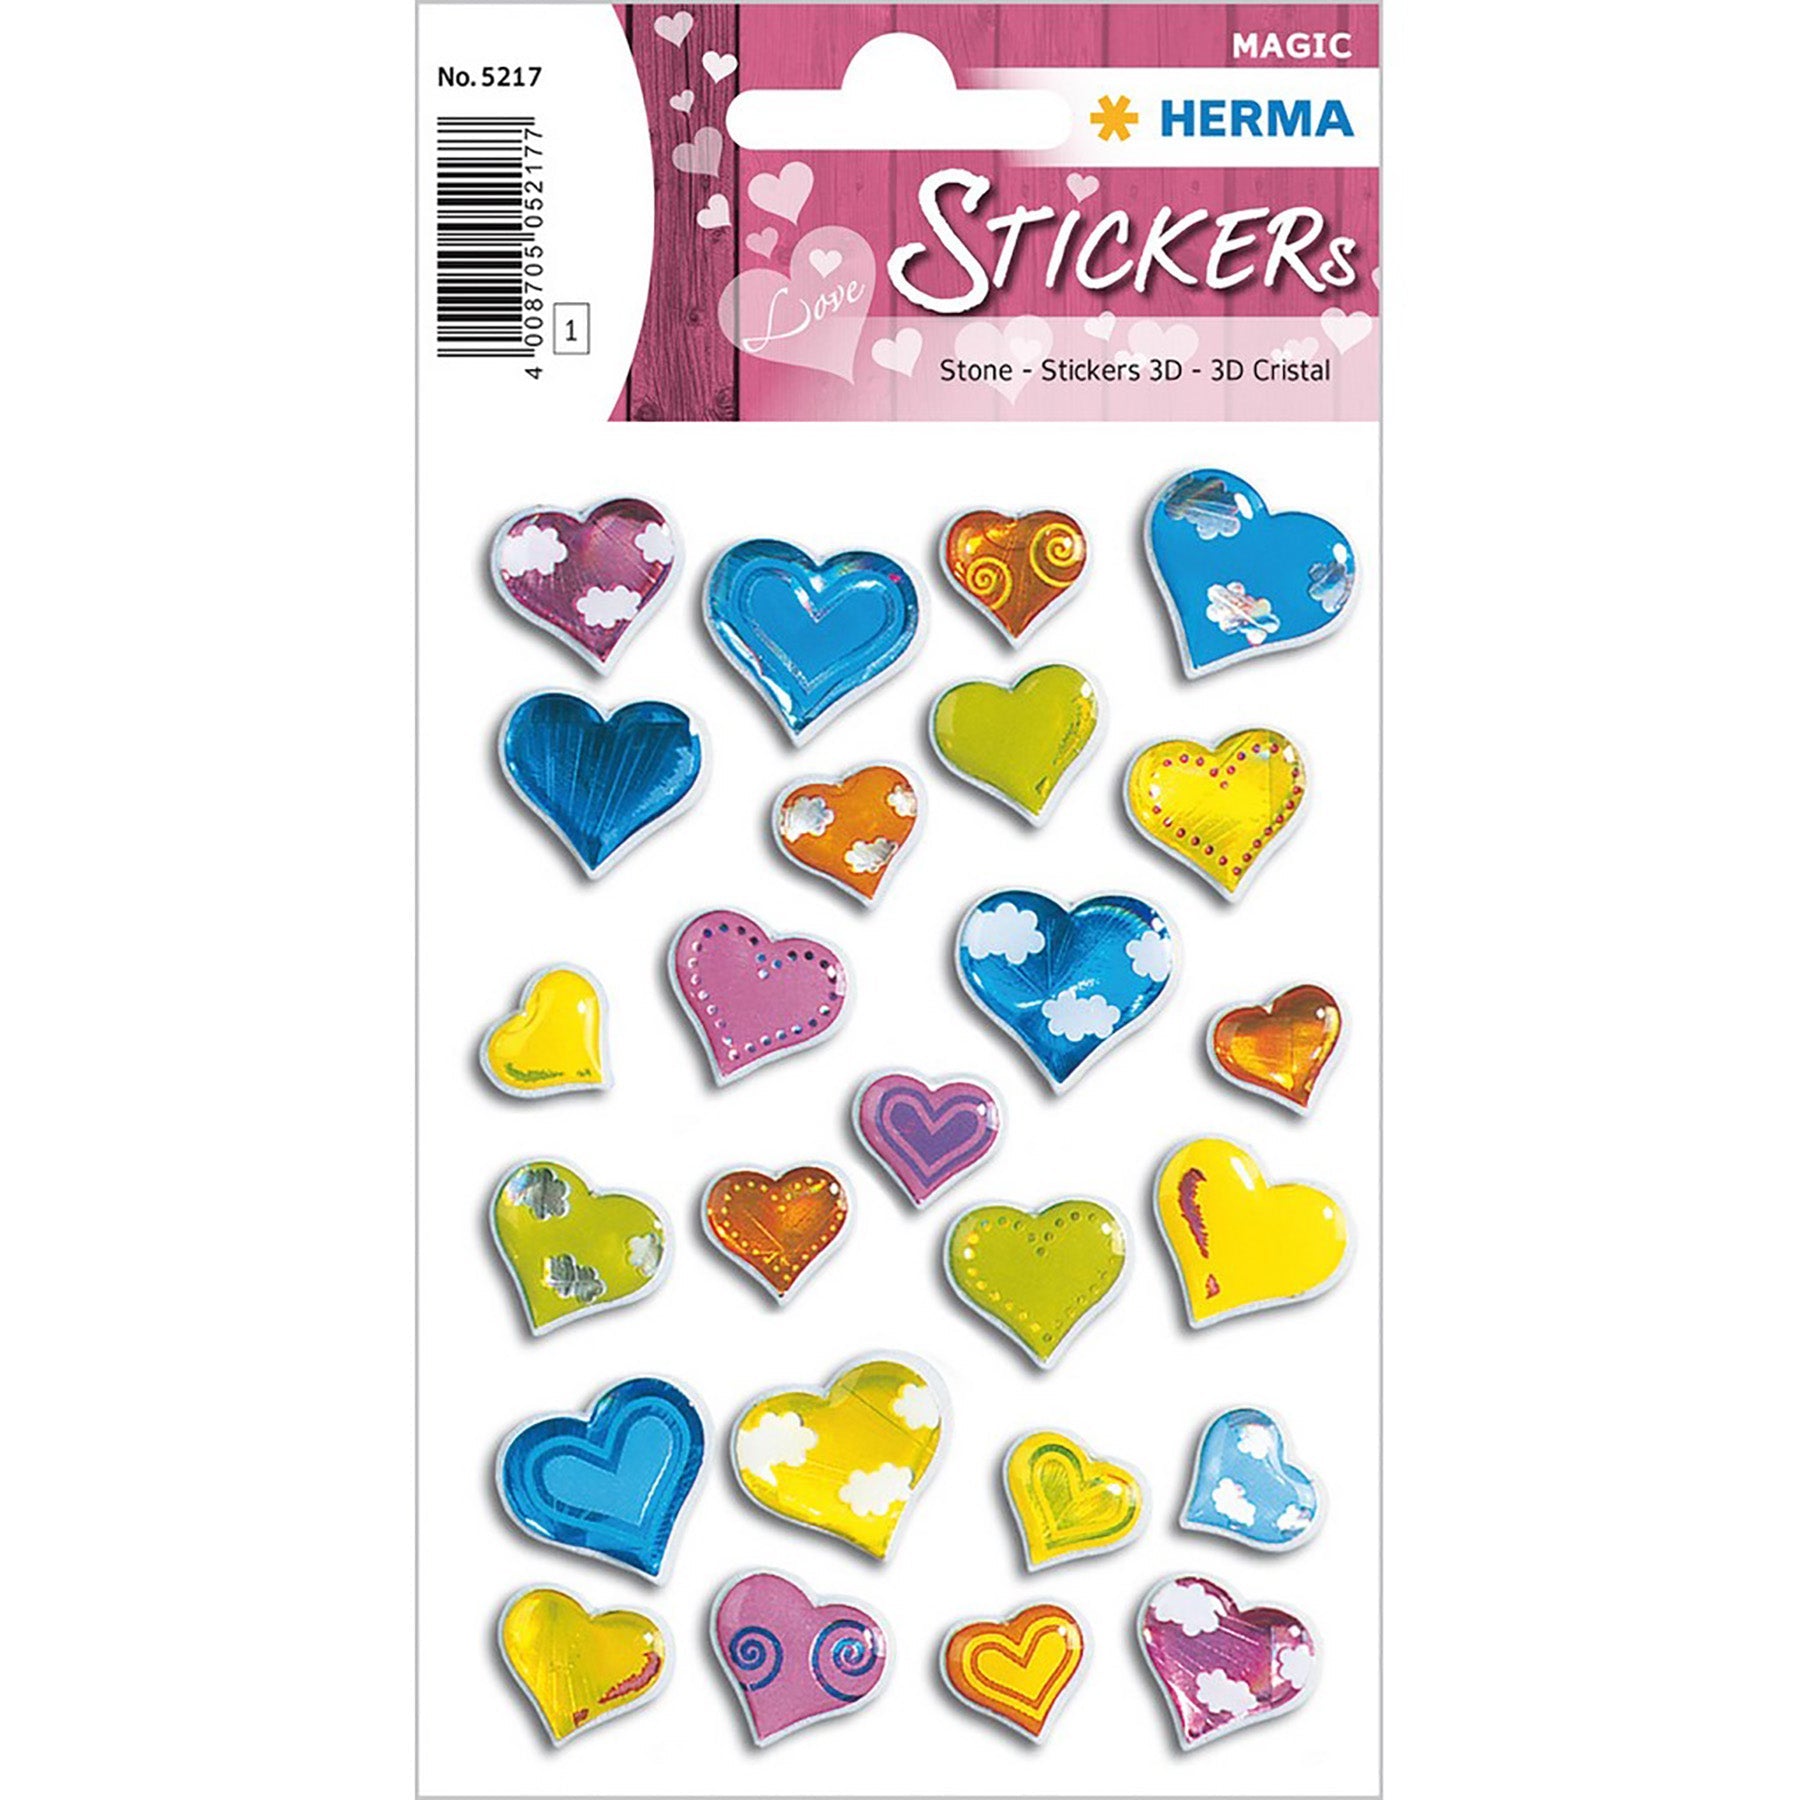 Herma Magic Stickers Hearts 3D Crystal 4.75x3.1in Sheet